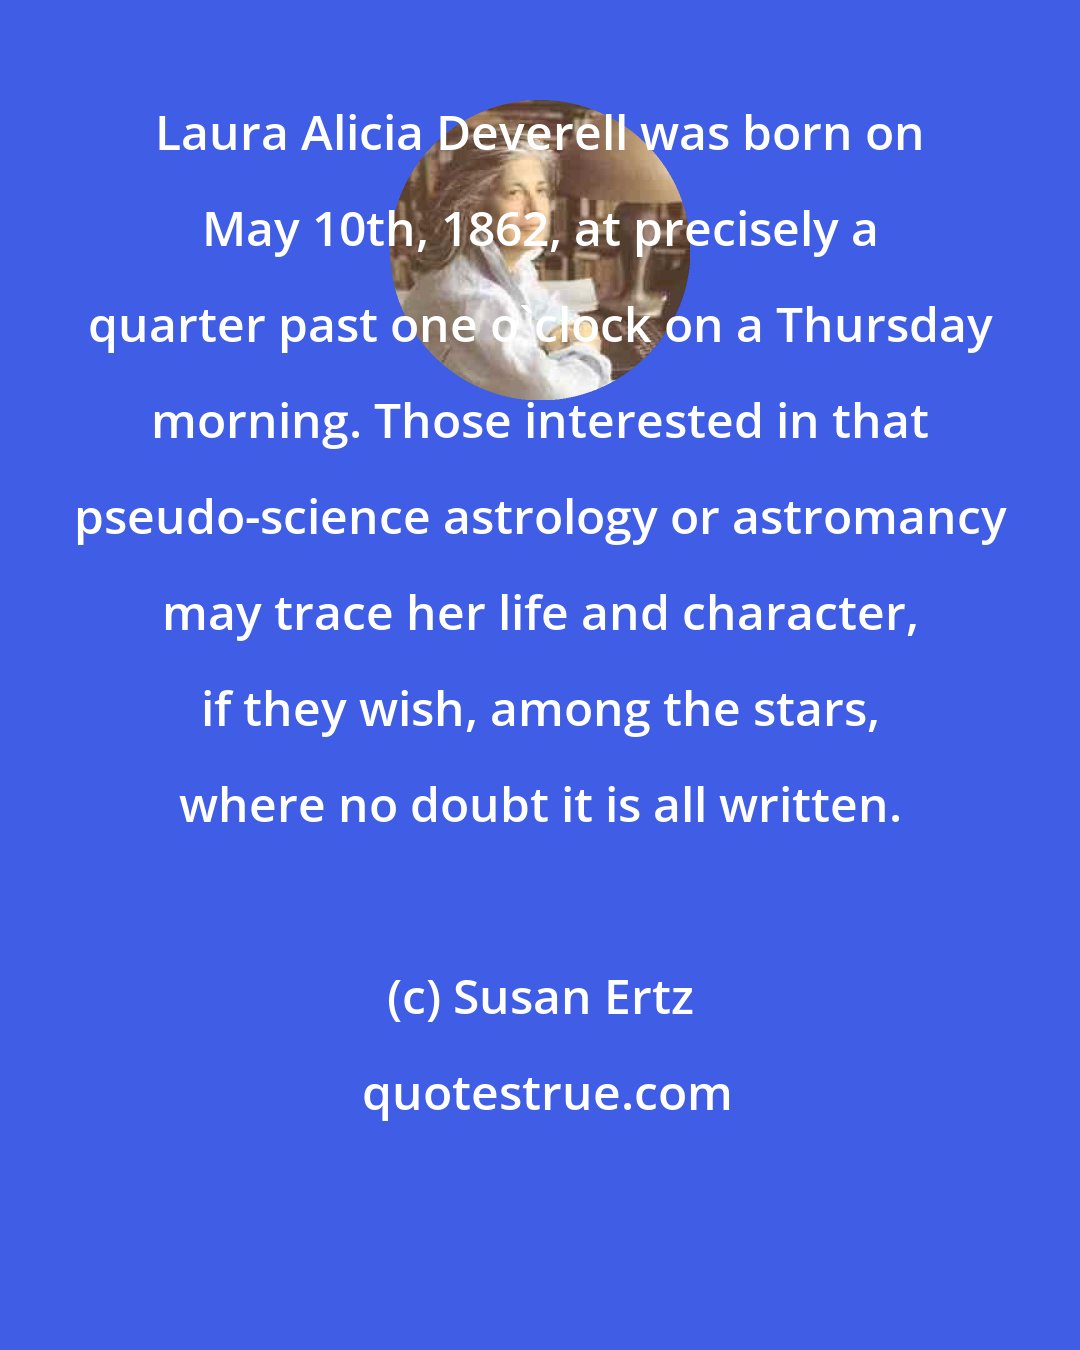 Susan Ertz: Laura Alicia Deverell was born on May 10th, 1862, at precisely a quarter past one o'clock on a Thursday morning. Those interested in that pseudo-science astrology or astromancy may trace her life and character, if they wish, among the stars, where no doubt it is all written.